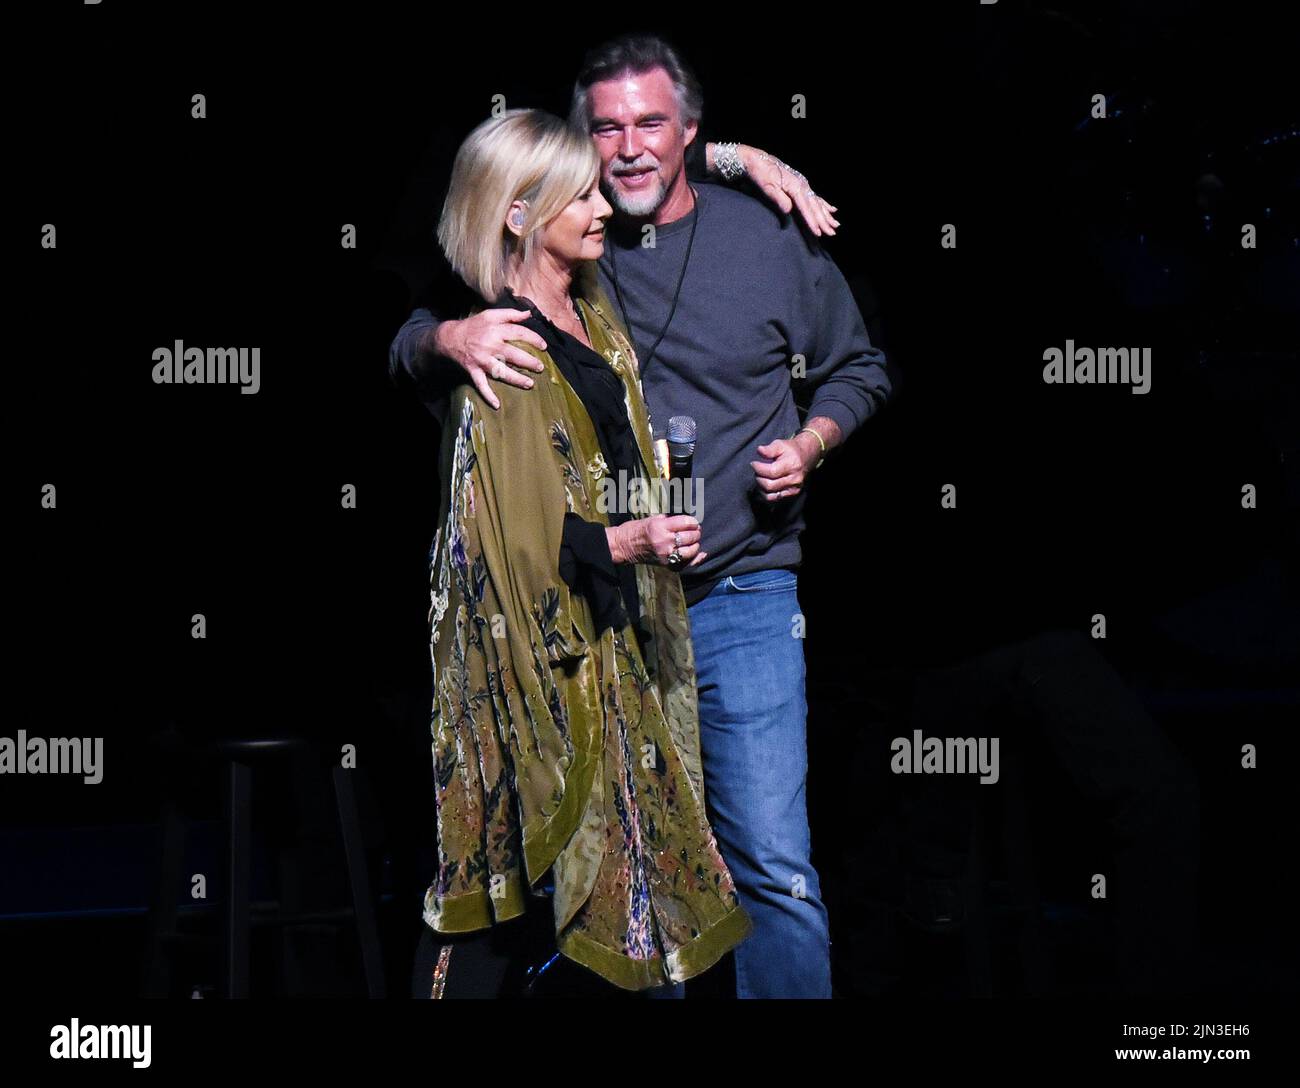 FILE PICS: Olivia Newton-John 1948-2022. Atlanta, GA, USA. 9th Apr, 2017. Olivia Newton-John surprises her husband John Easterling by singing a parody of “The Girl From Ipanema” as “The Boy From North Carolina” (in his honor) which she had sung for him at their wedding. The surprise performance took place at Cobb Energy Center in Atlanta, Georgia on April 9, 2017. Credit: Chris Mc Kay/Media Punch/Alamy Live News Credit: MediaPunch Inc/Alamy Live News Stock Photo